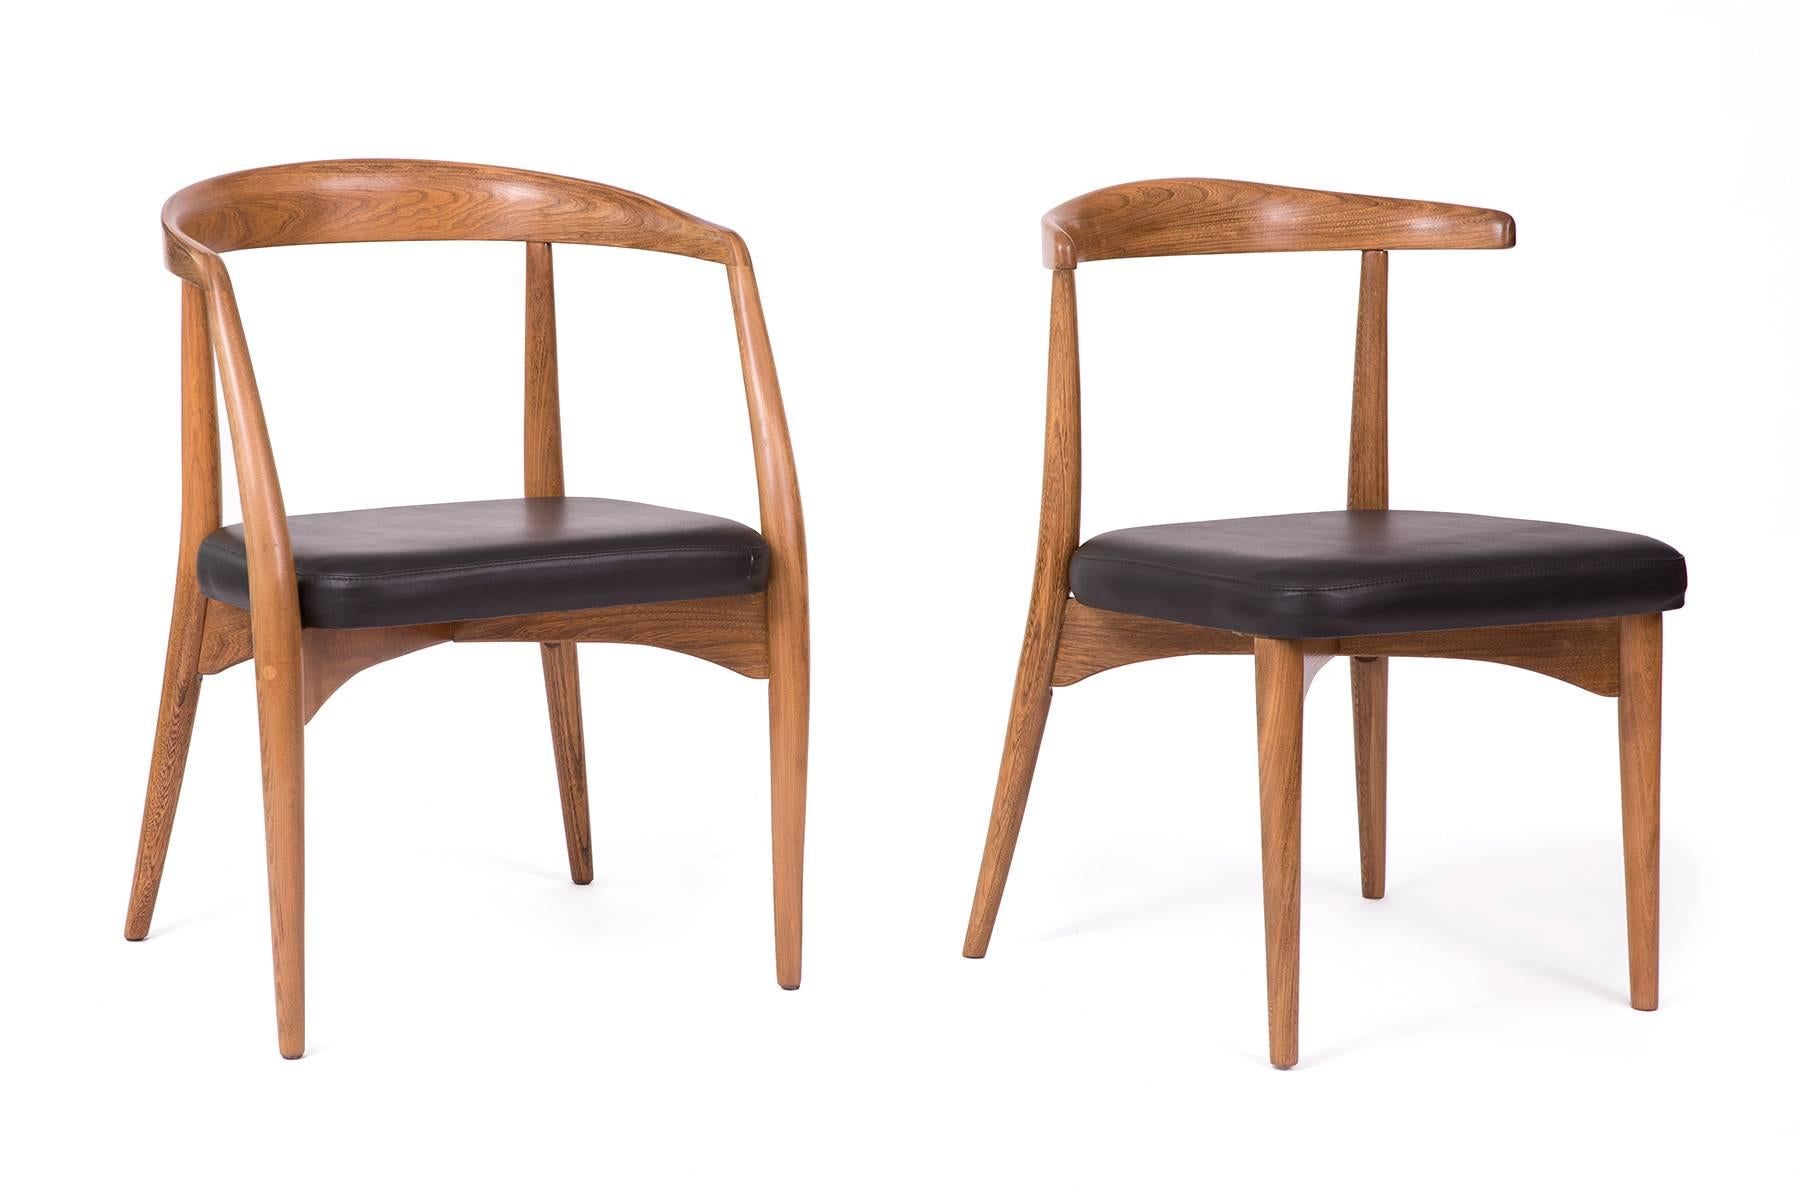 16 Lawrence Peabody oak walnut and leather dining chairs, circa early 1960s. These examples have been newly and impeccably finished and newly upholstered in black leather. we have four armchairs and 12 sides. Four of these examples are slightly